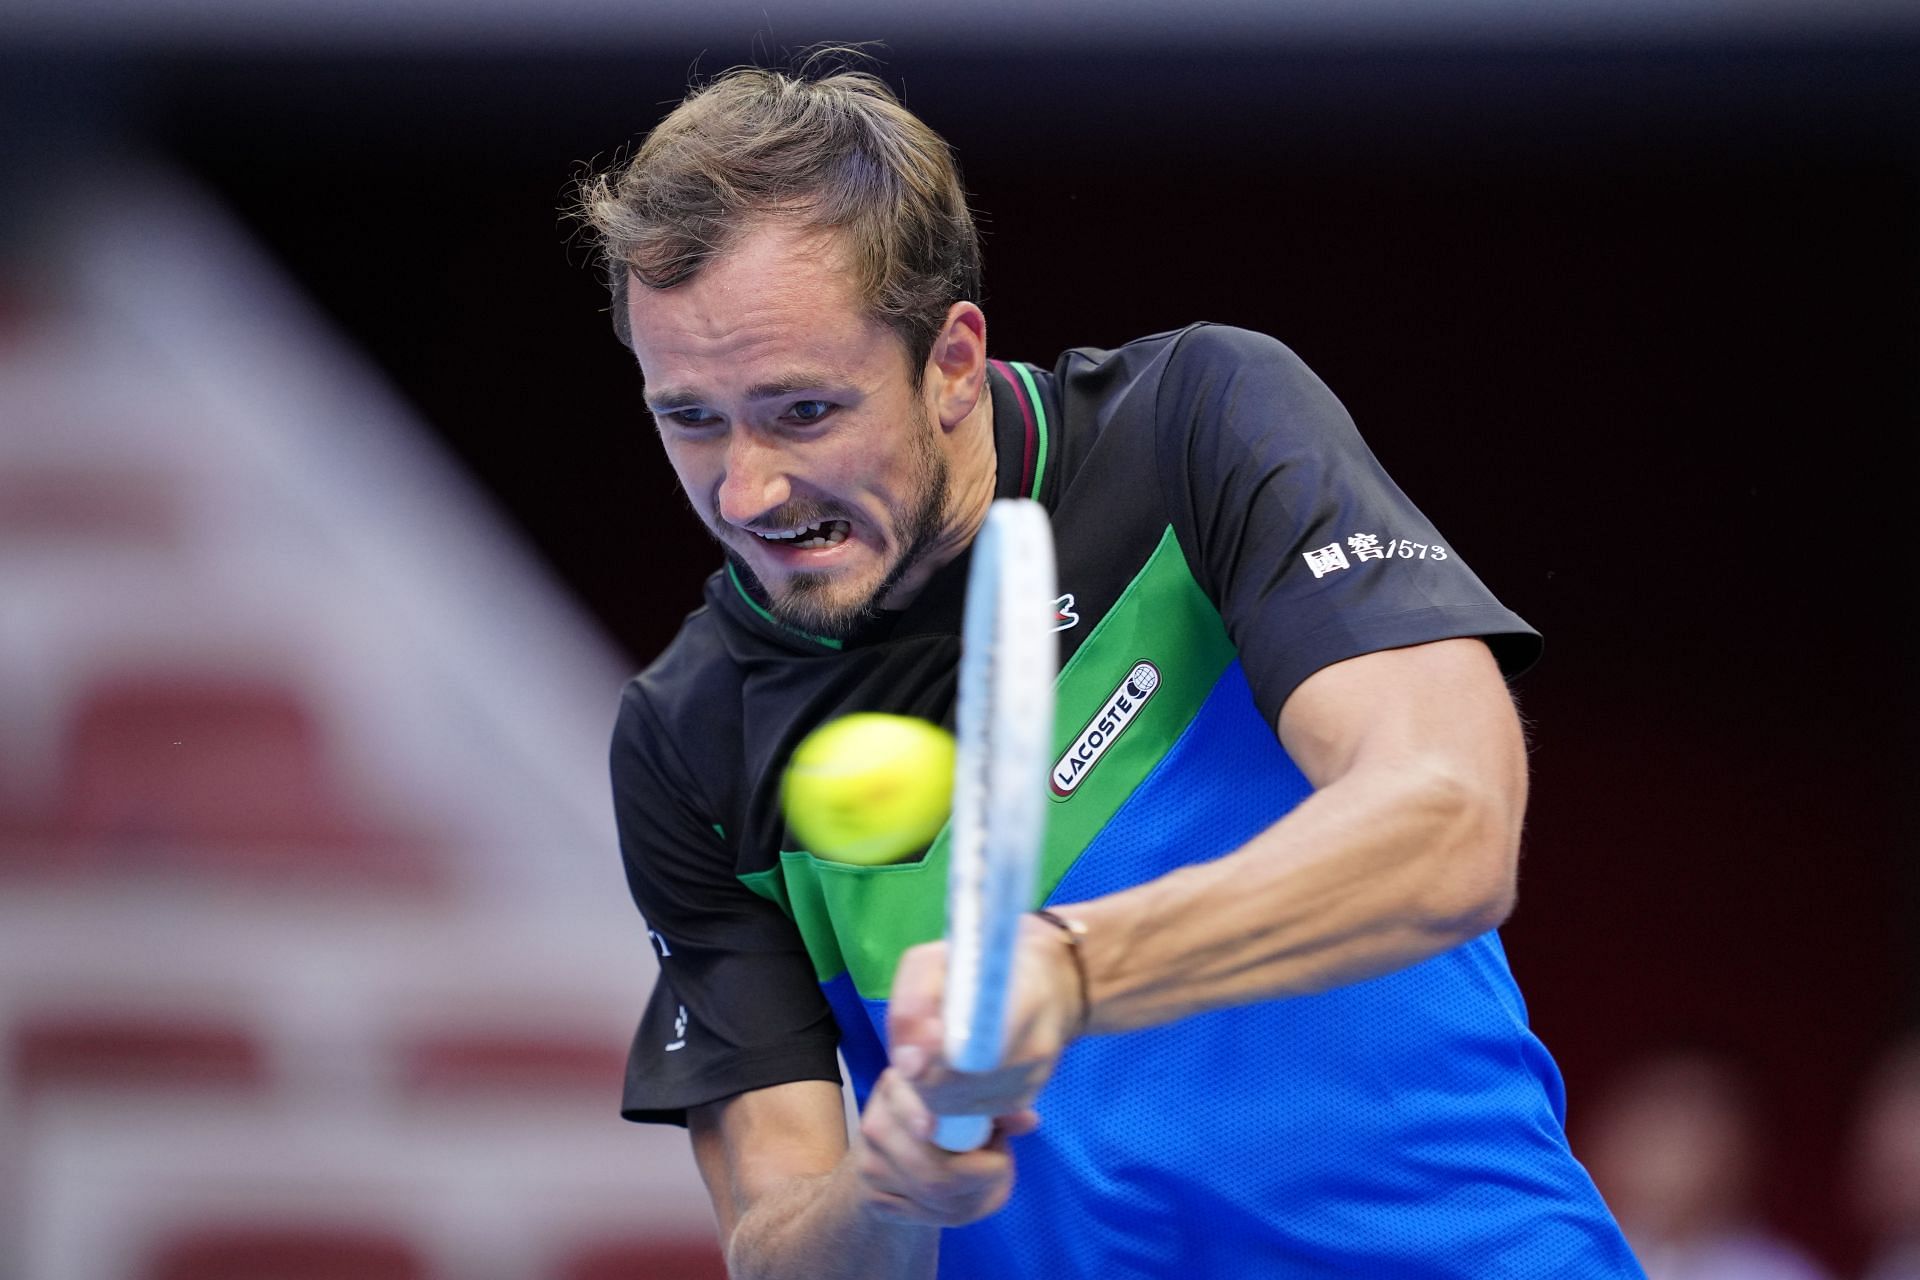 Daniil Medvedev in action at the China Open